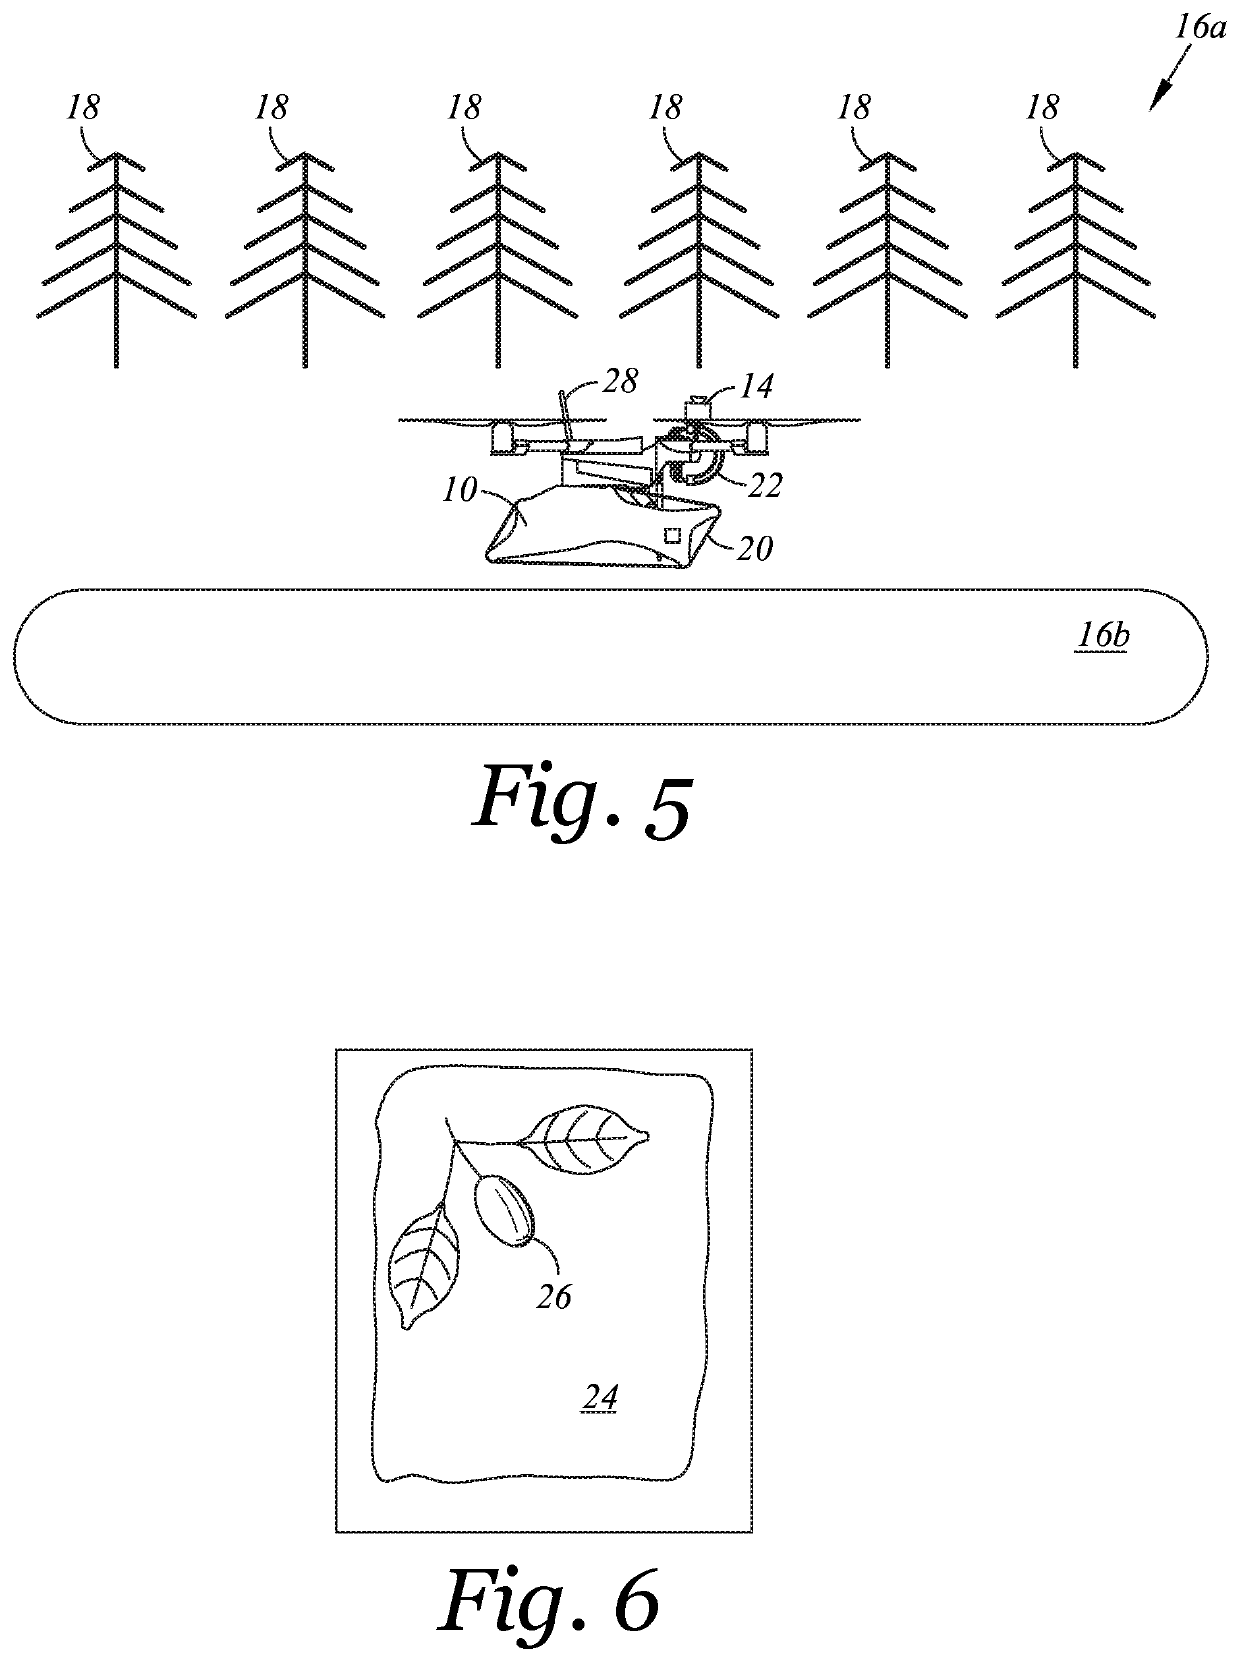 Method of Crop Analysis using Drone with Flying and Driving Capability